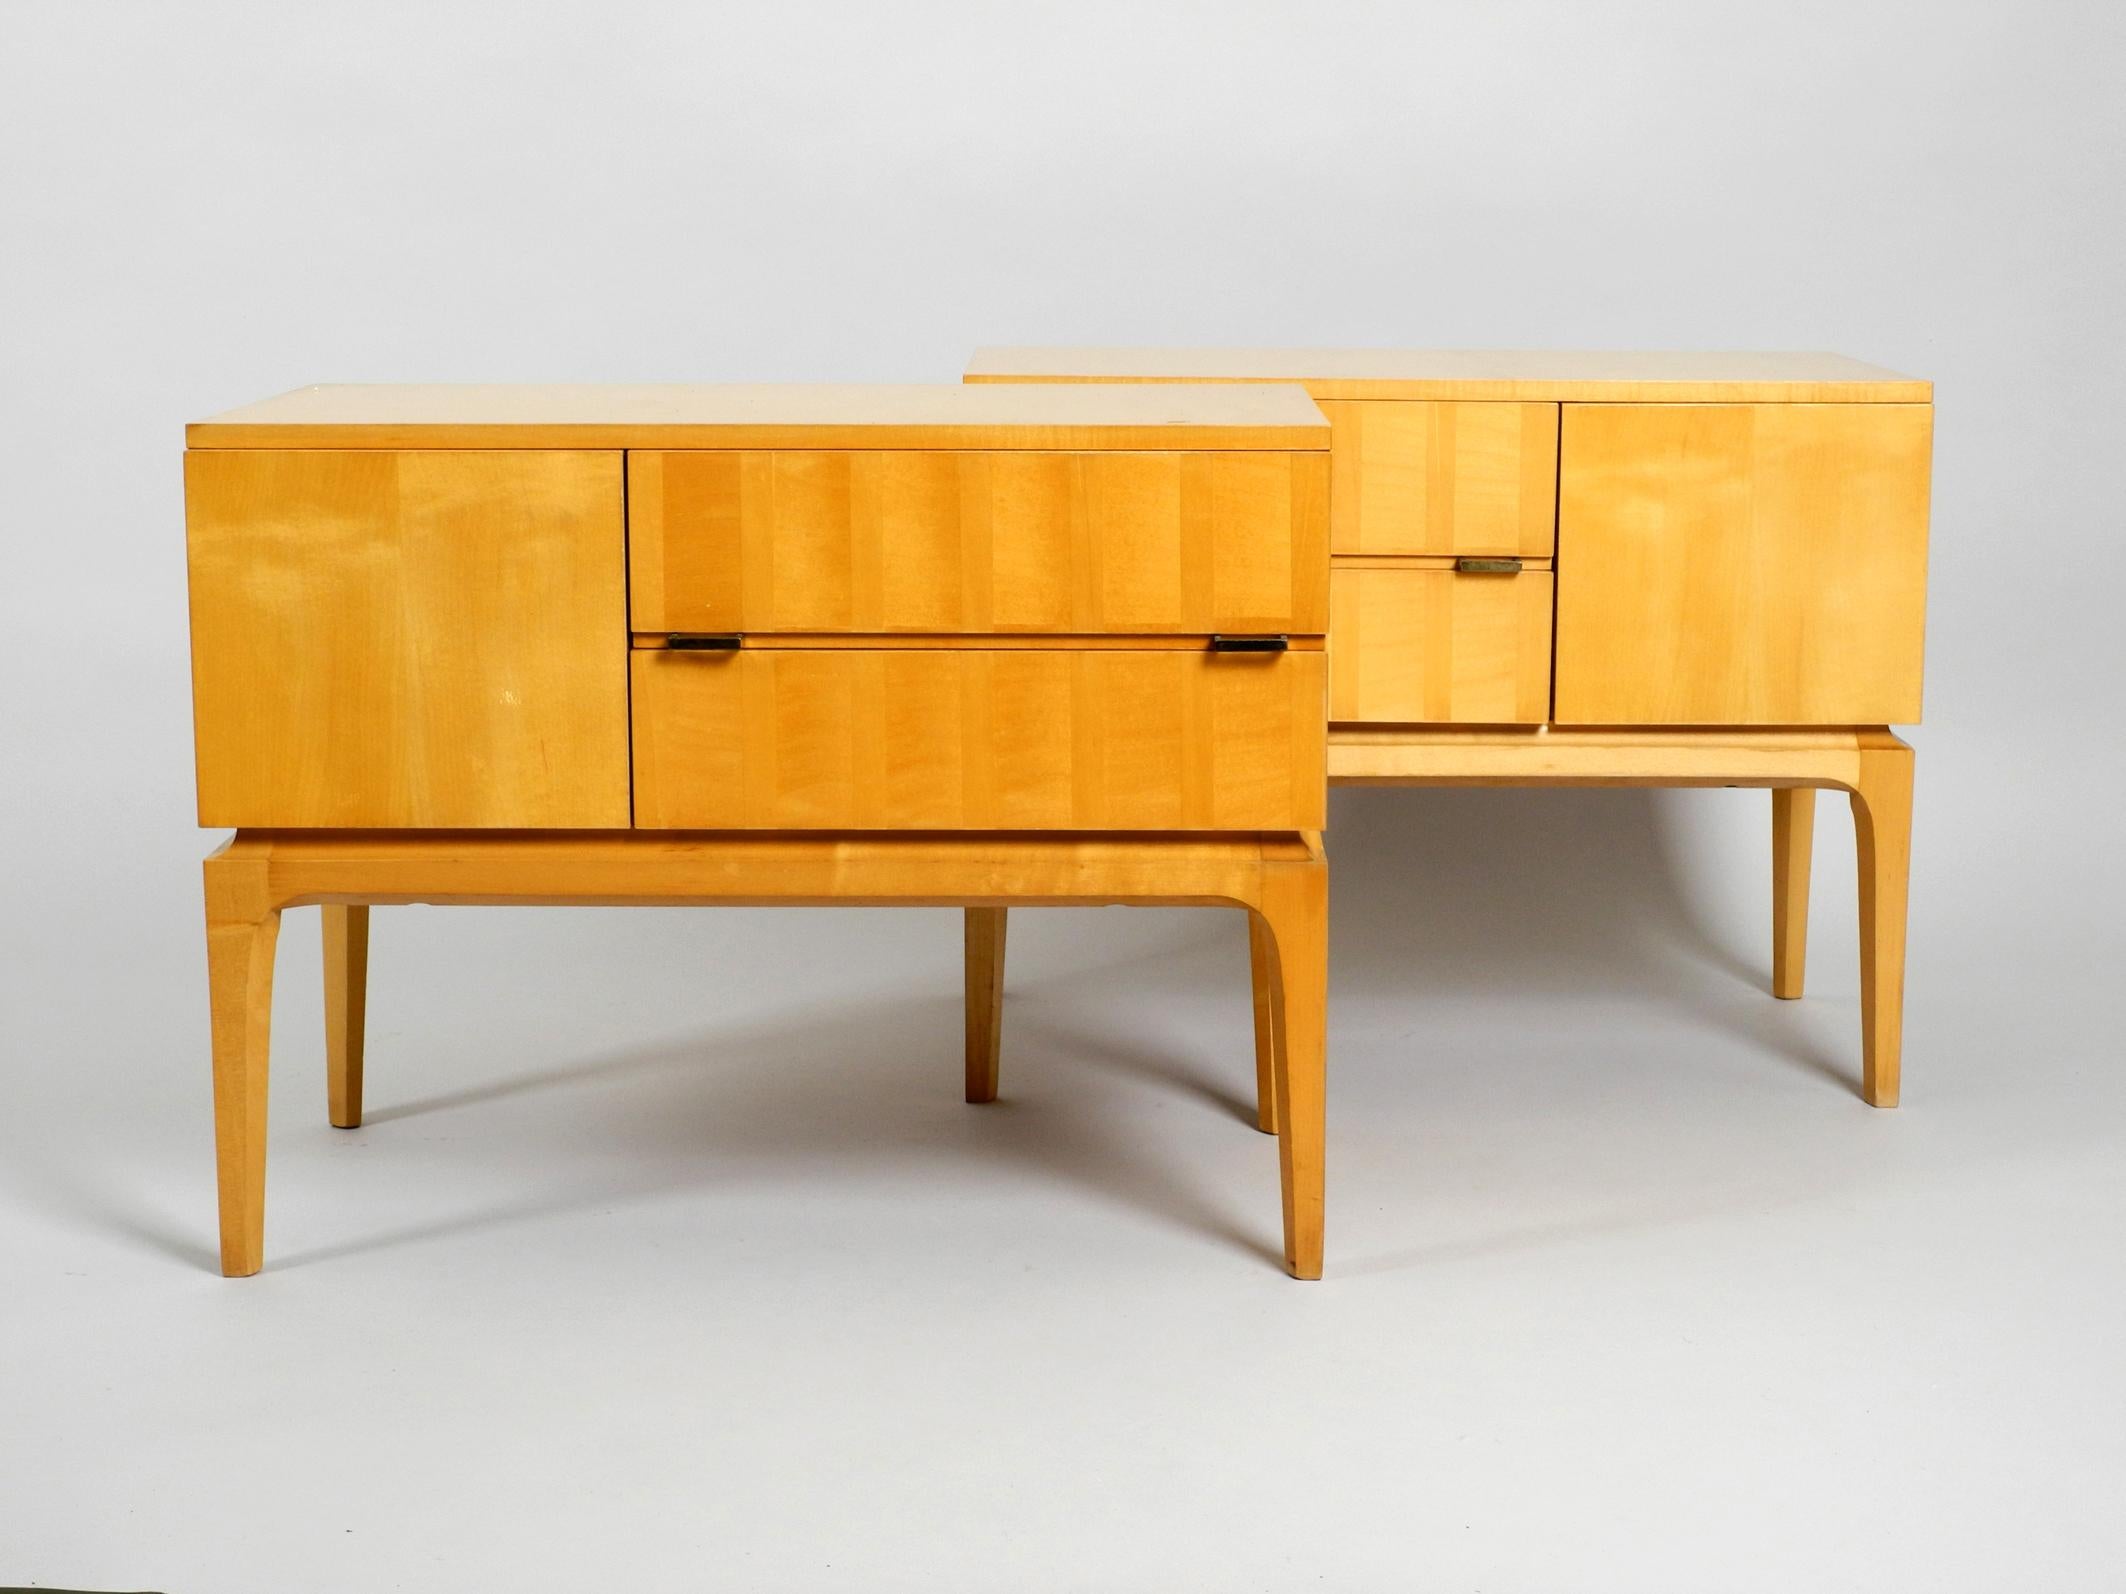 Two beautiful 1950s maple wood nightstands with clear lacquer. 
Typical midcentury design in very good vintage condition, probably never used. 
Inside the drawers they are like new.
With two drawers and a folding compartment. Both open and close